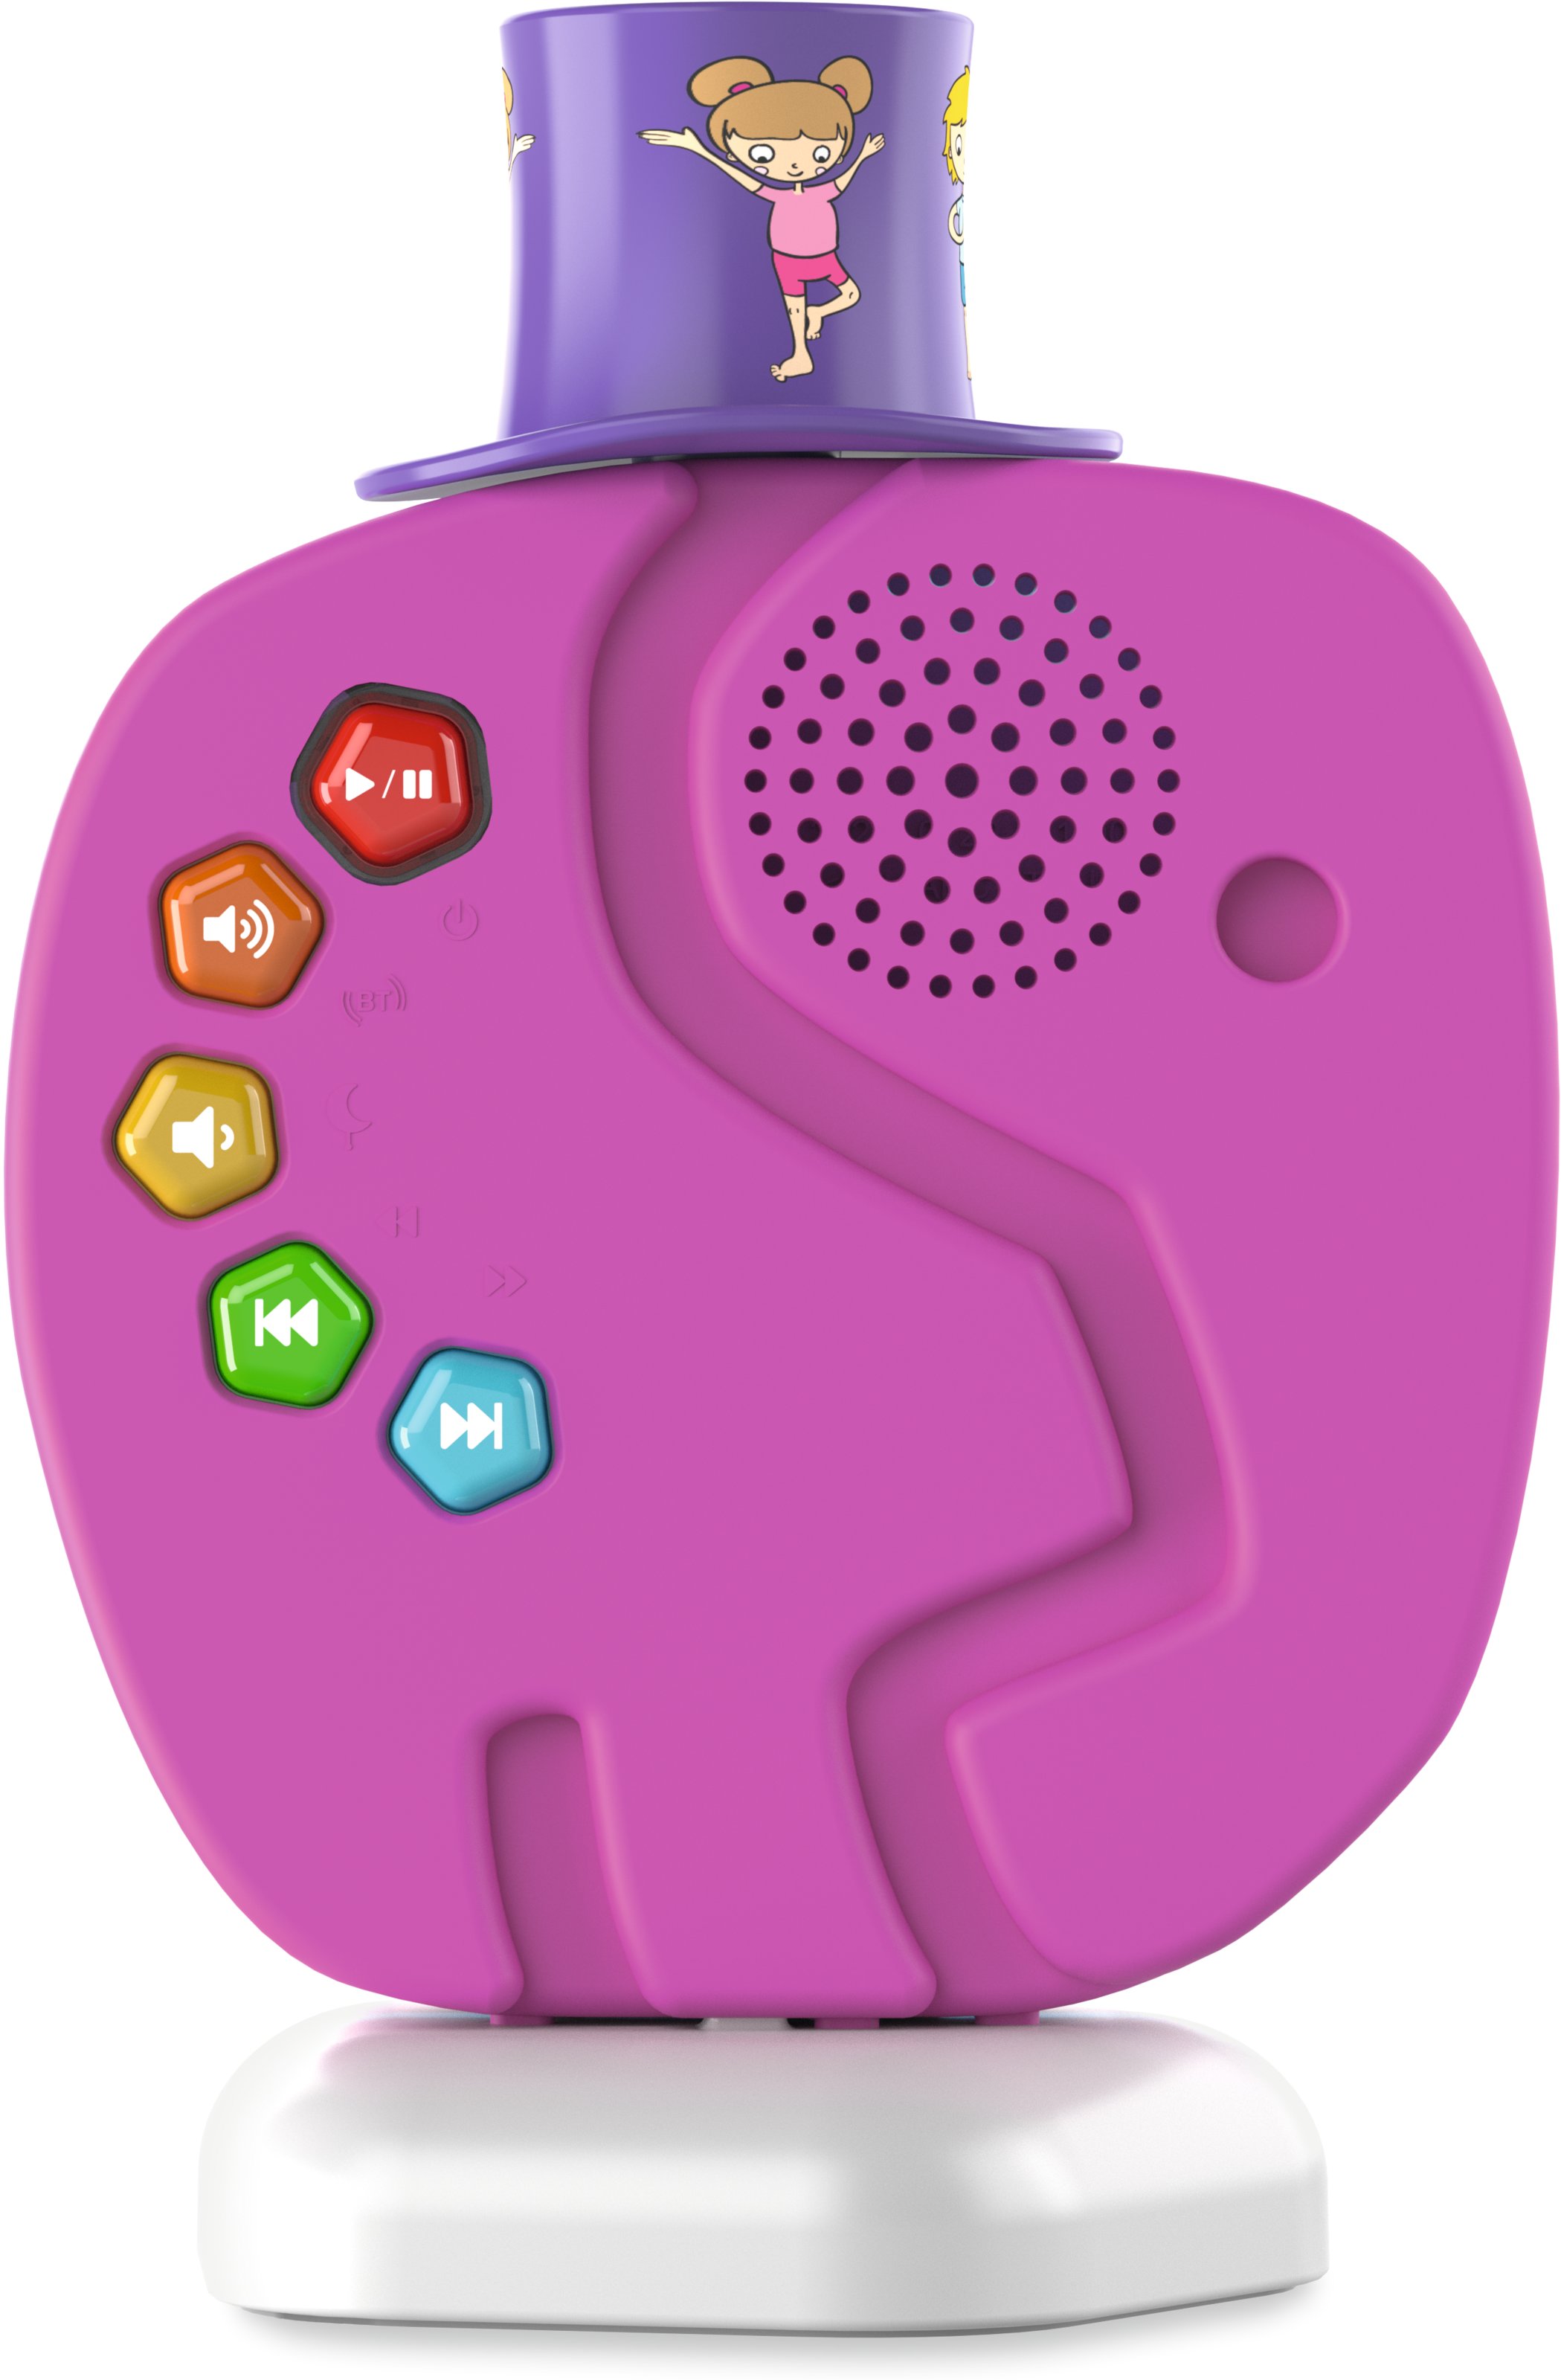 The TECHNIFANT is a mobile music player for children with several audio figures